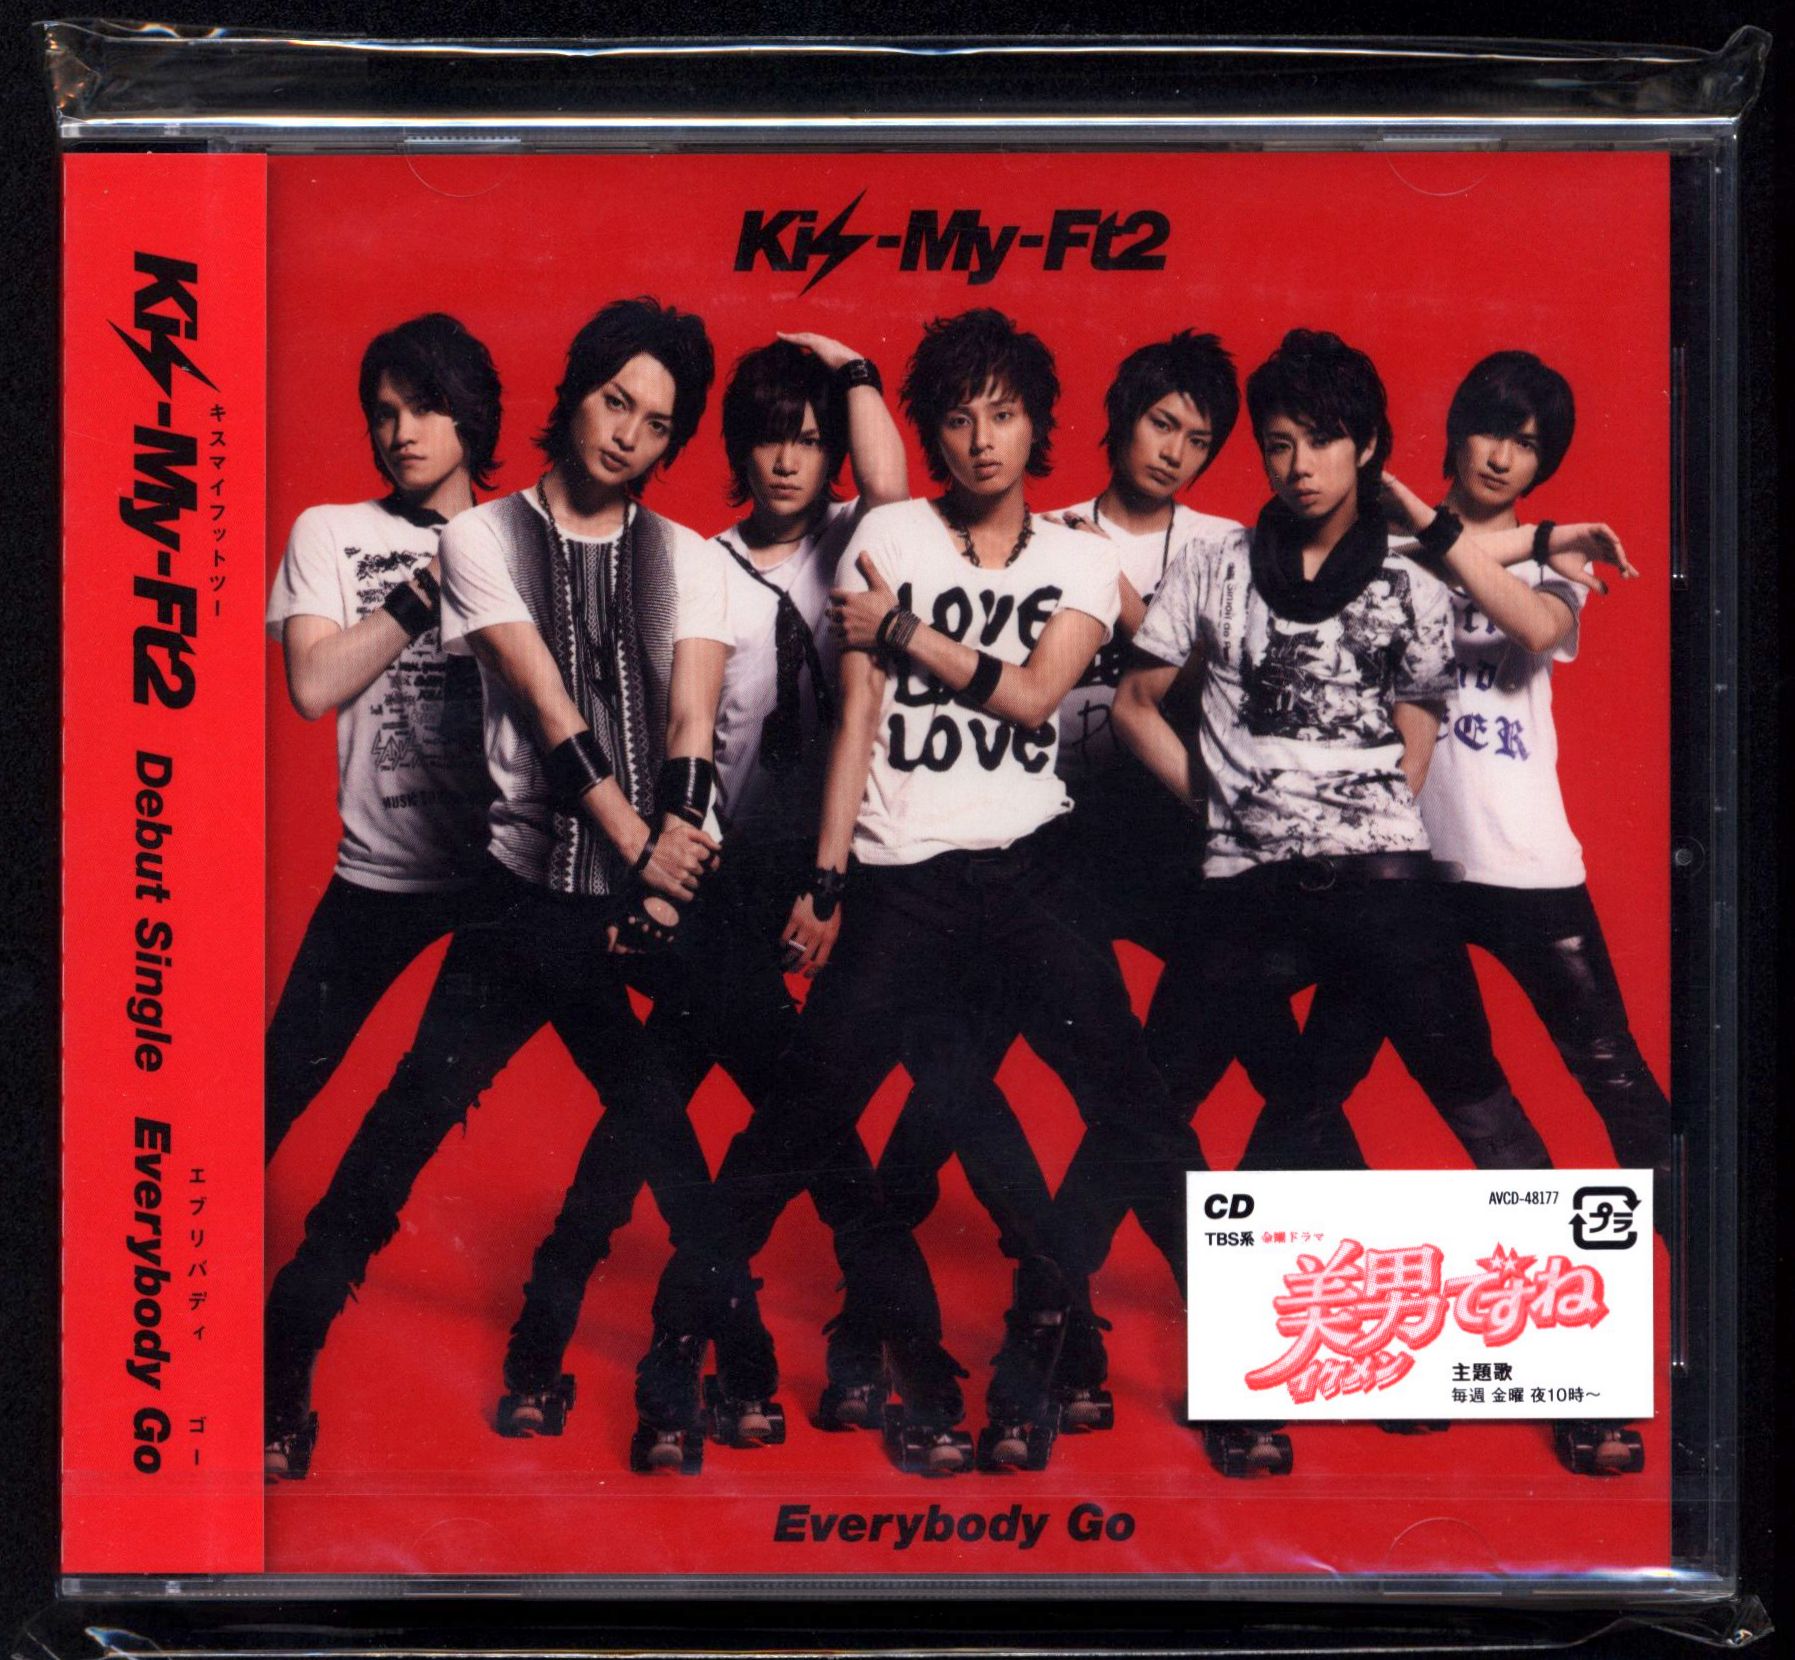 Kis-My-Ft2 キスマイ まとめて30点 Everybody Go通常盤 - 邦楽